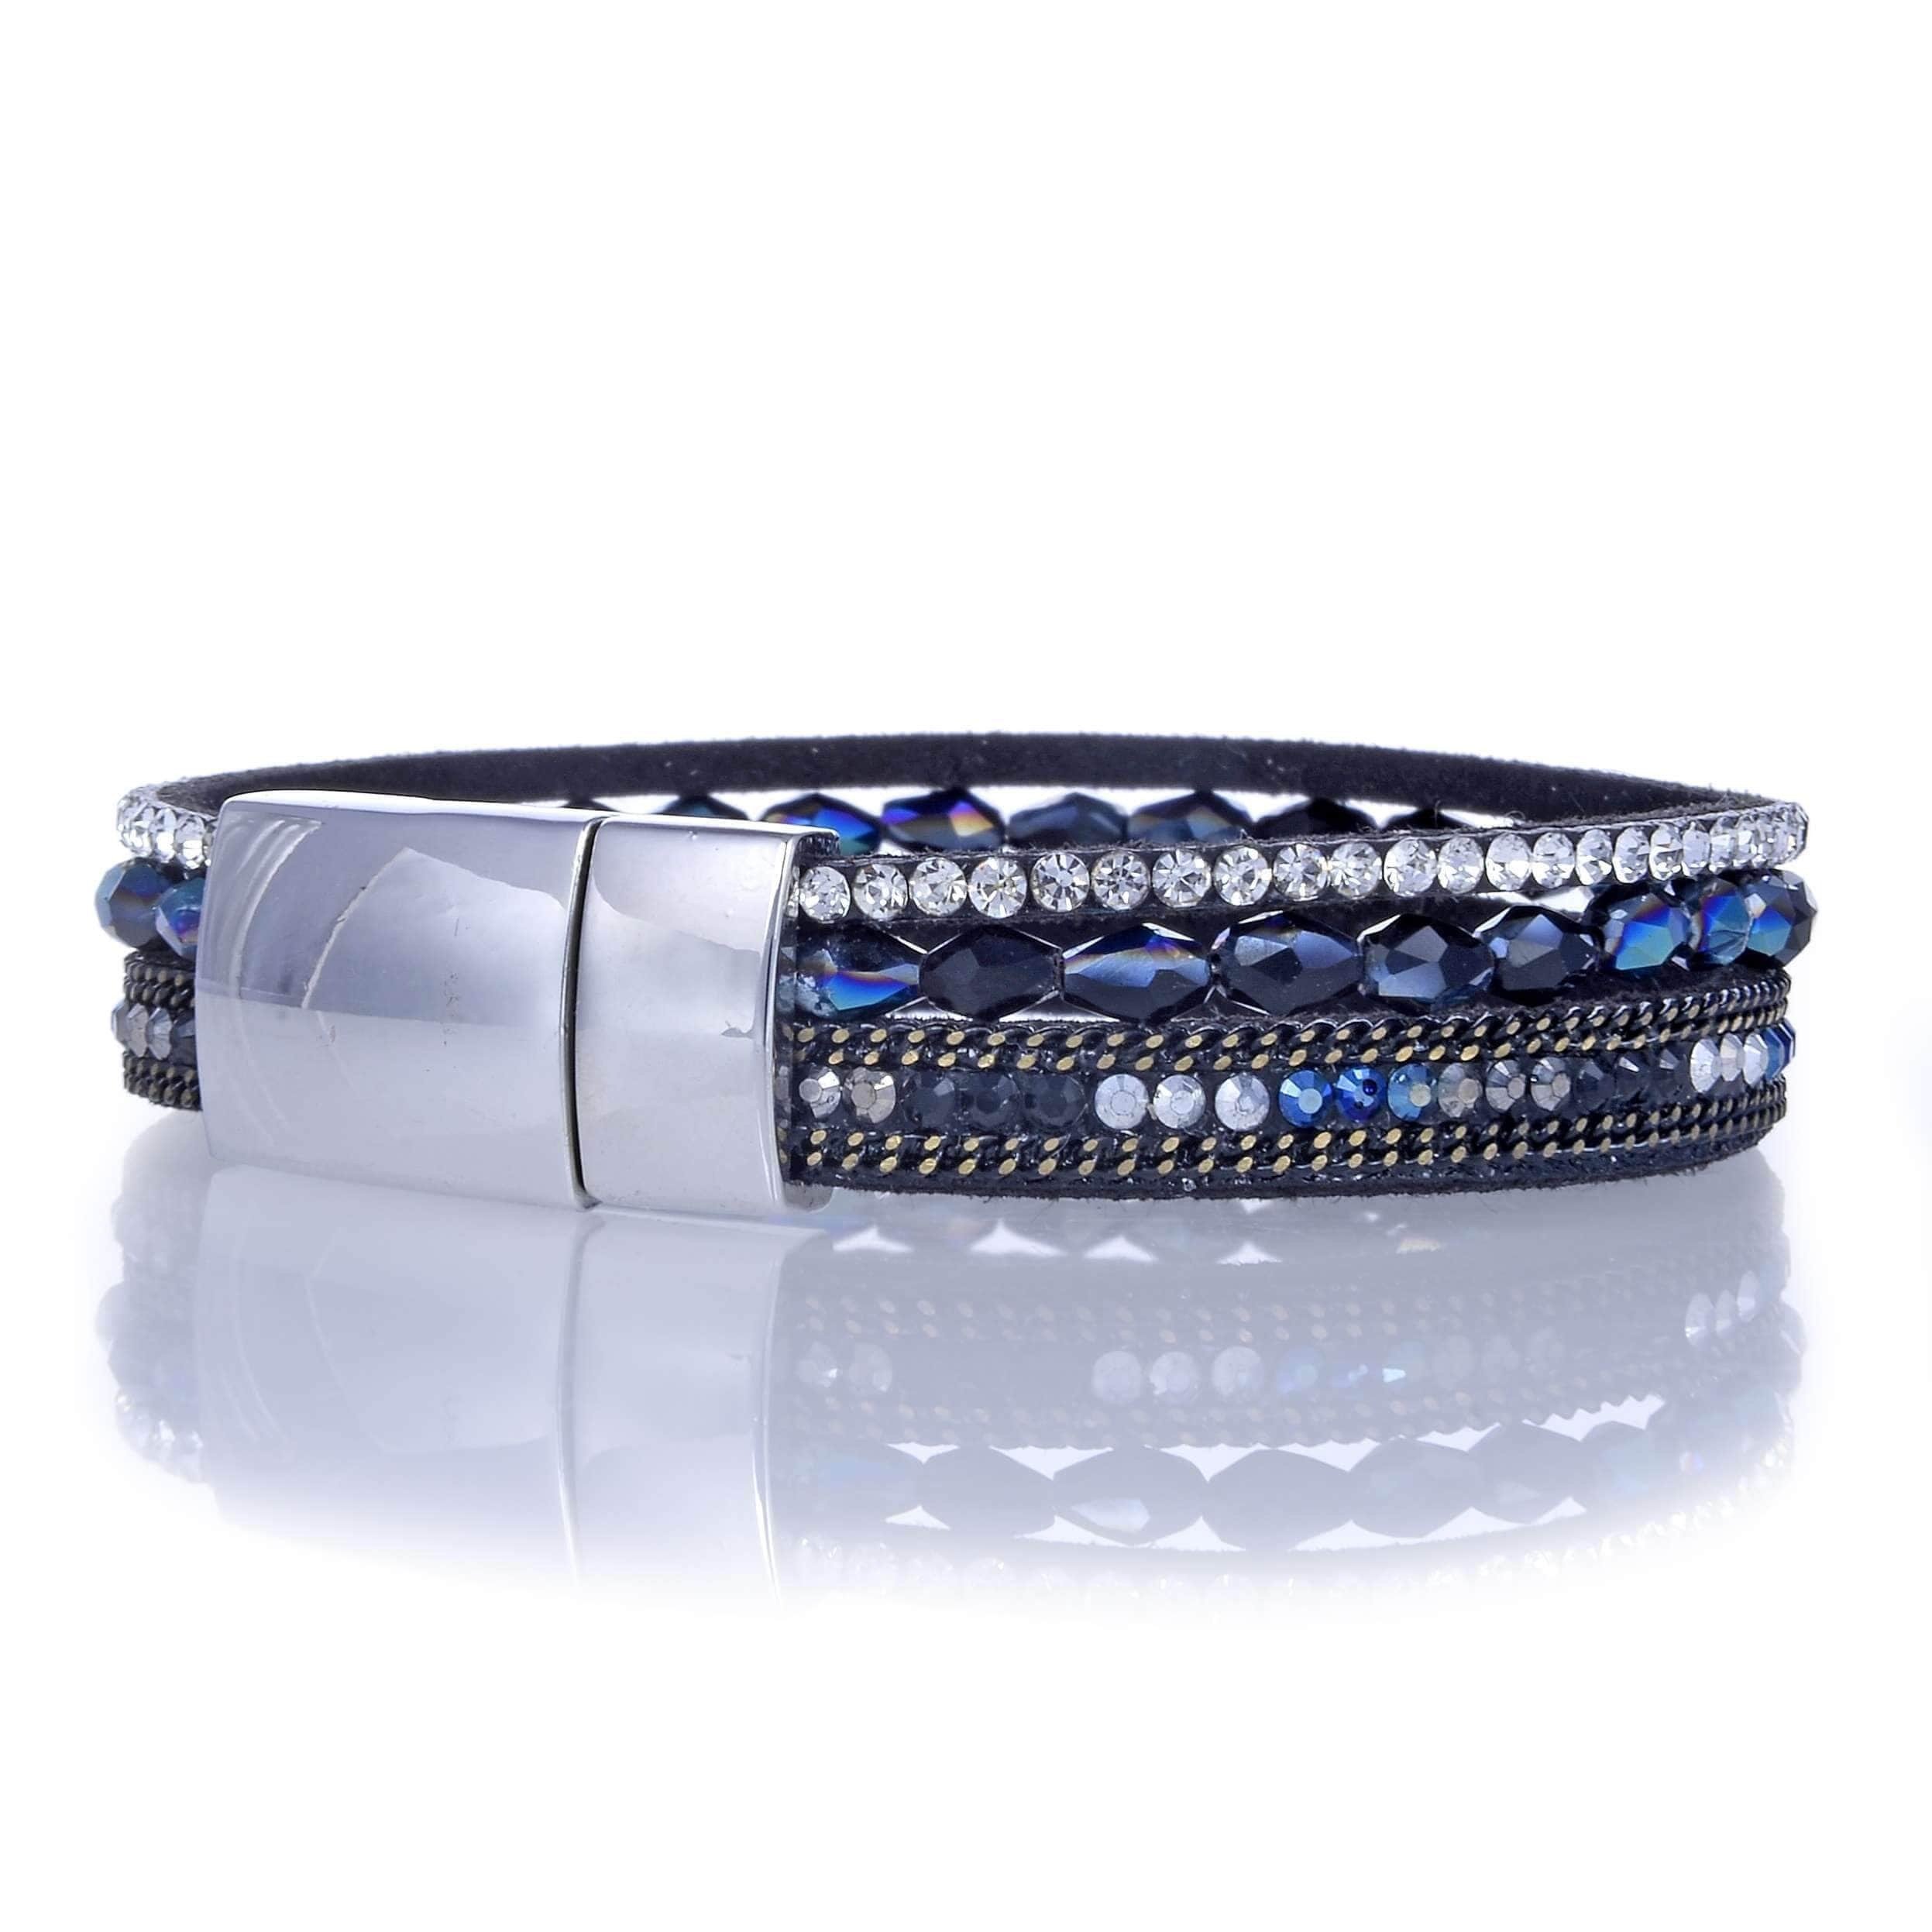 Navy Briolette Gemstone Beads & Black Leather Multiple Wrap Bracelet With Magnetic Clasp